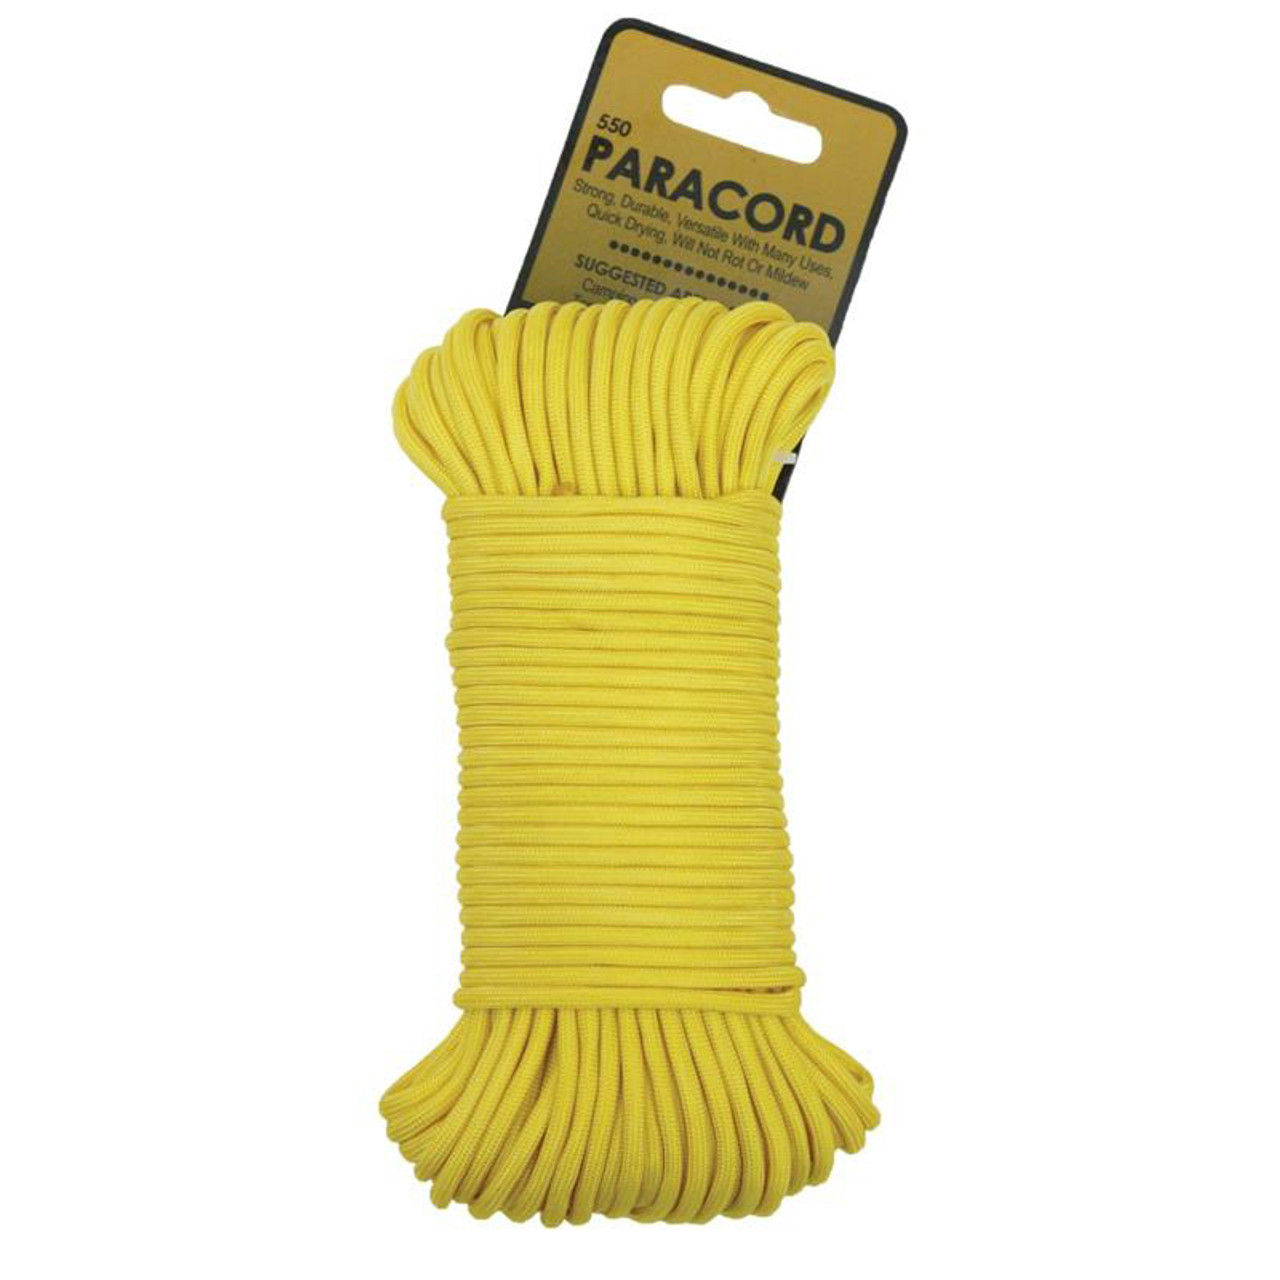 5/32 in x 100 ft Yellow 550 Paracord